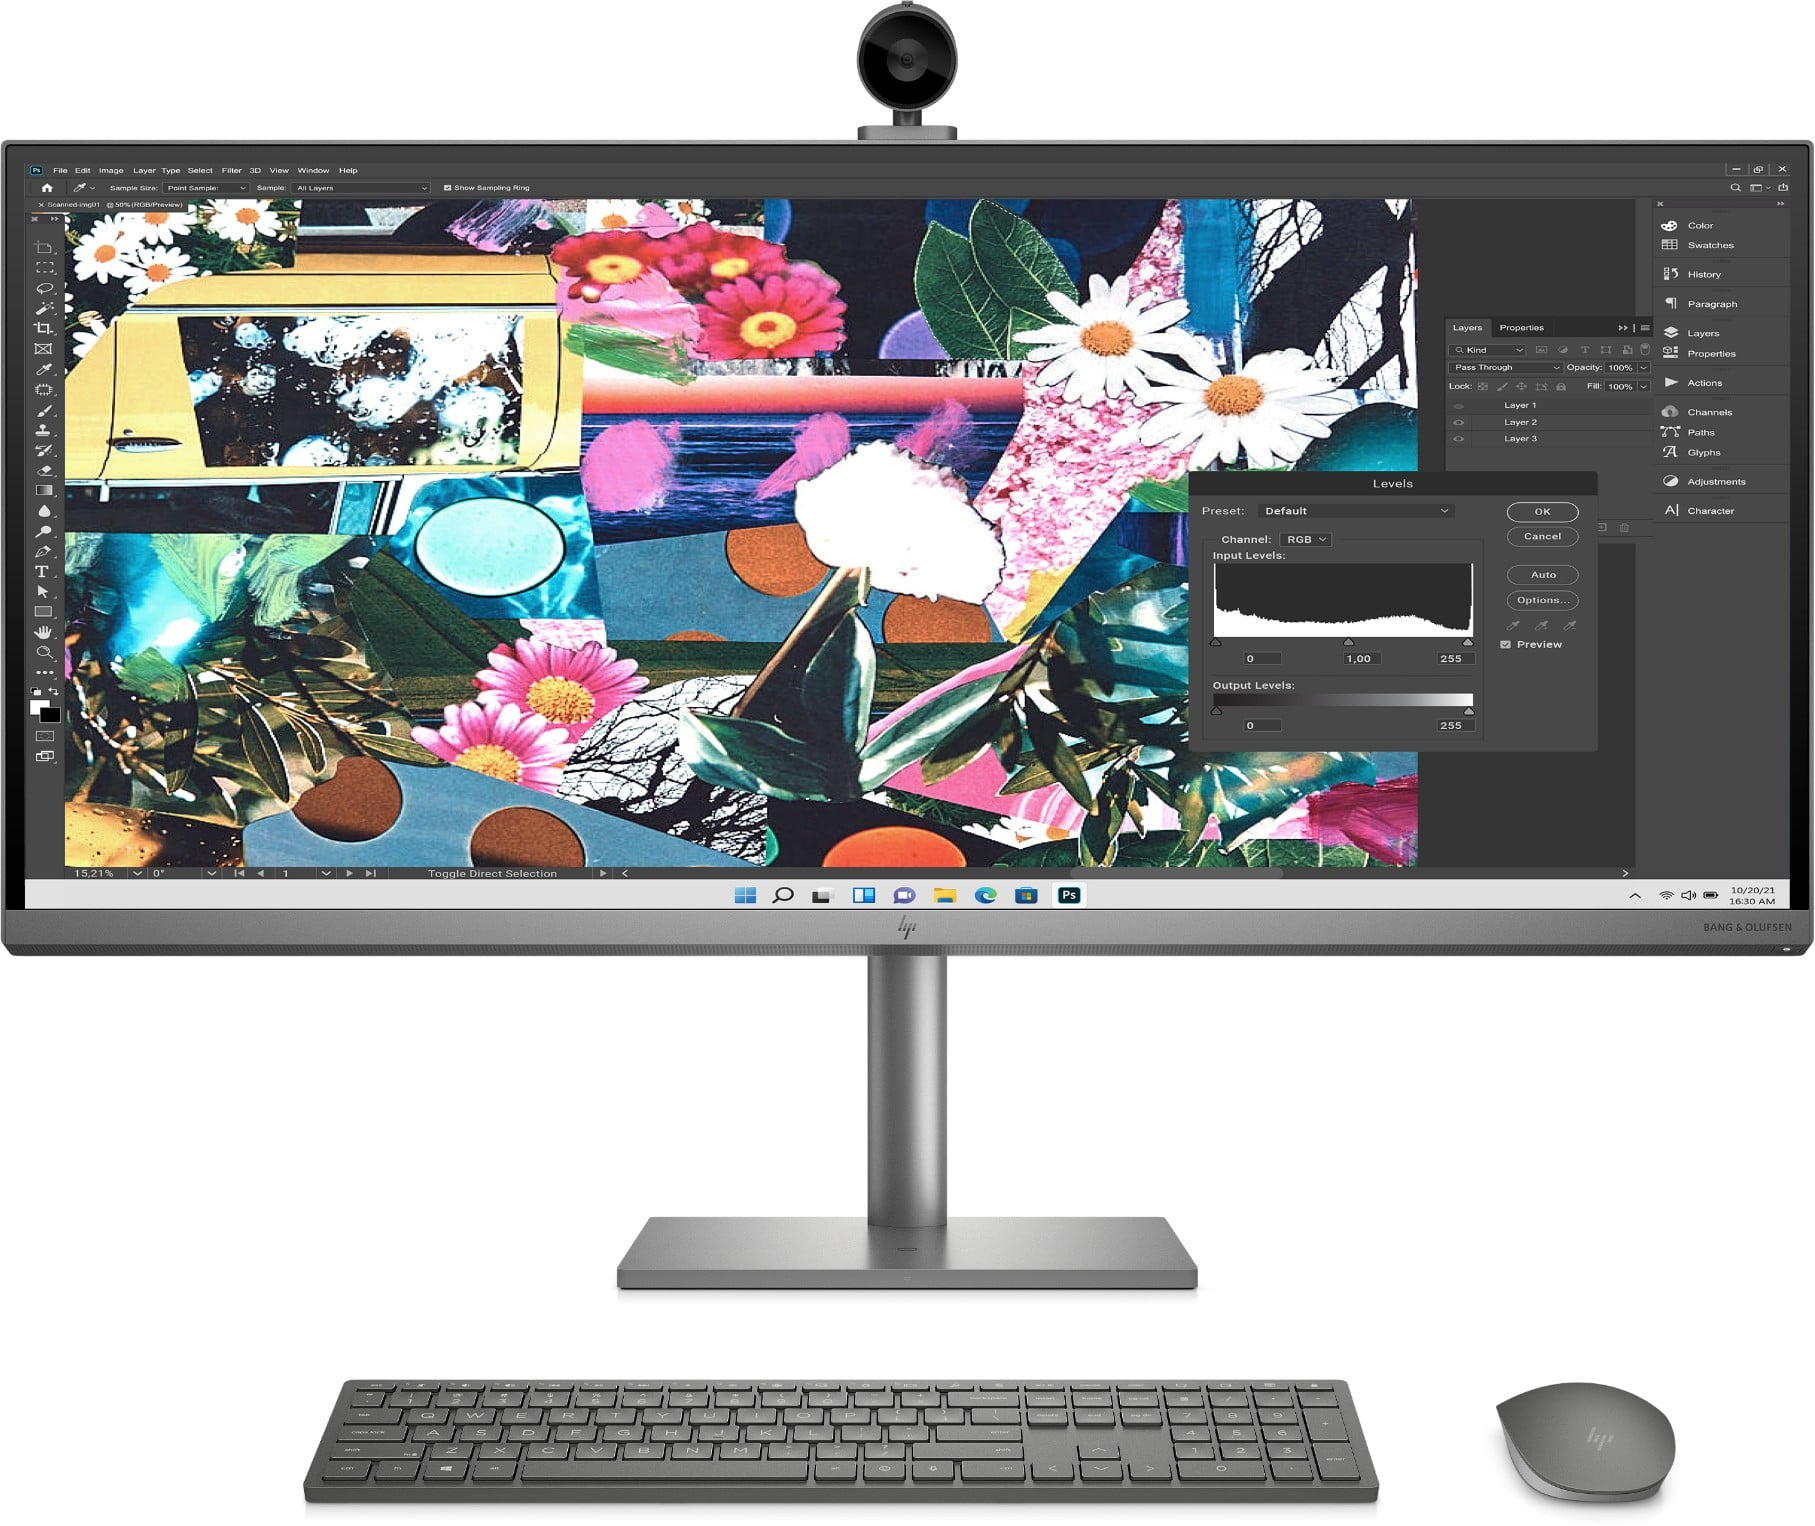 HP ENVY 34 All-in-One Desktop Computer | HP® Store